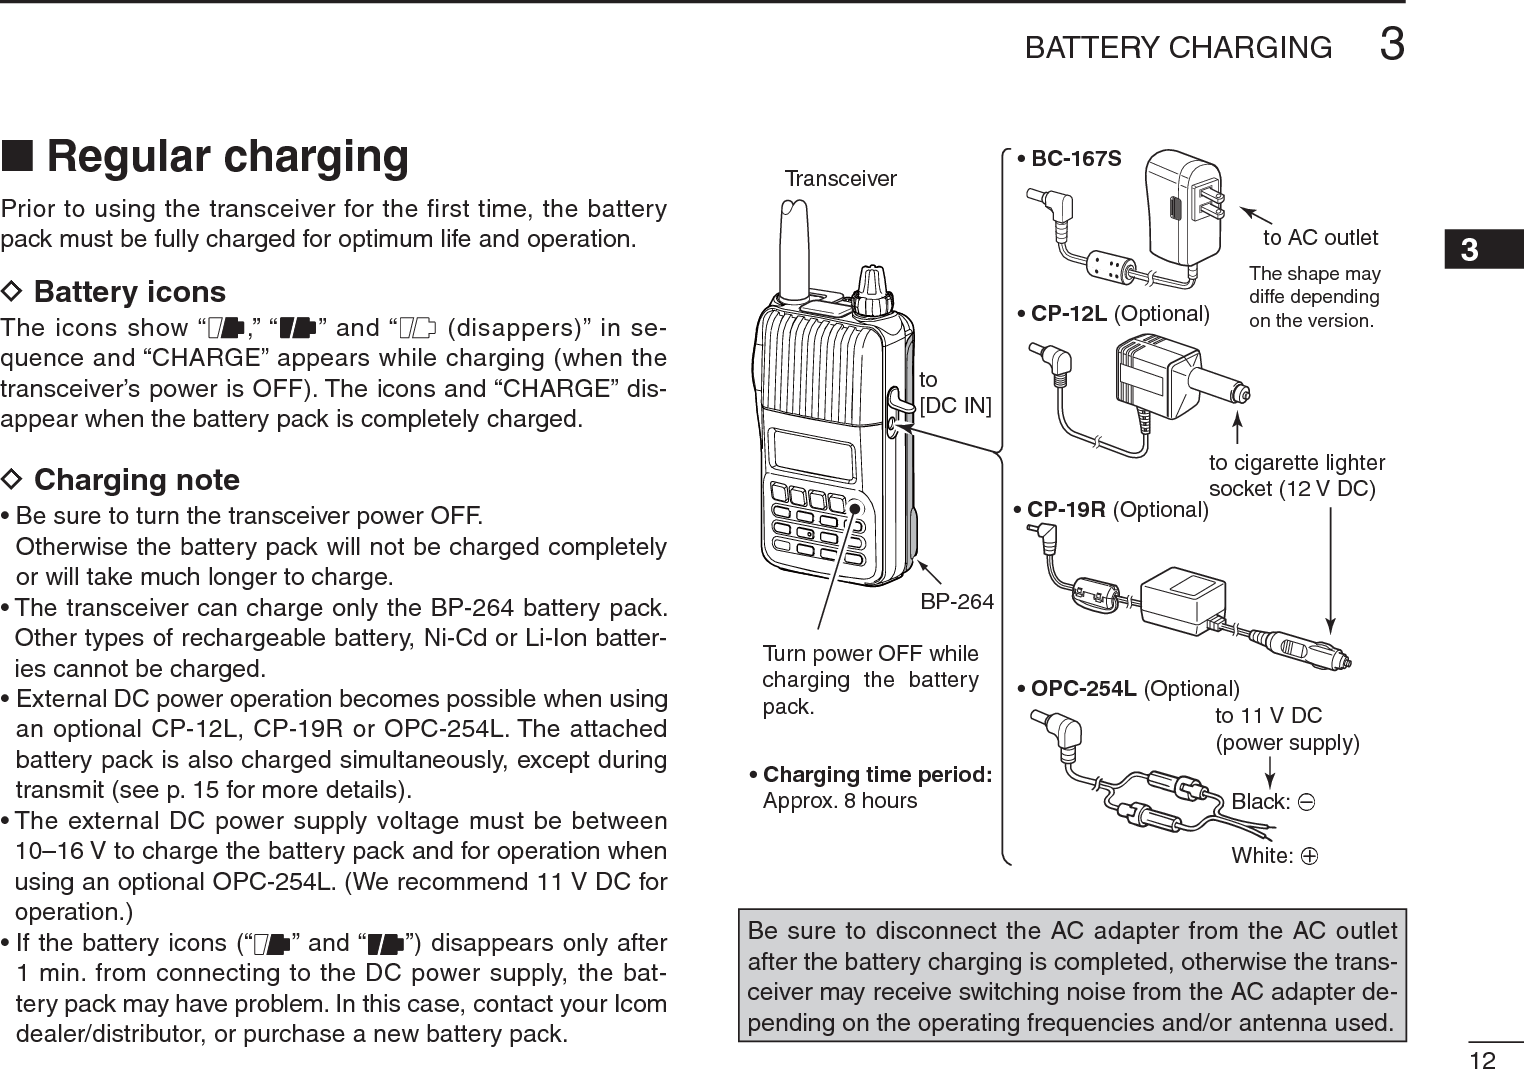 123BATTERY CHARGING3N Regular chargingPrior to using the transceiver for the first time, the battery pack must be fully charged for optimum life and operation.DBattery iconsThe icons show “ ,” “ ” and “  (disappers)” in se-quence and “CHARGE” appears while charging (when the transceiver’s power is OFF). The icons and “CHARGE” dis-appear when the battery pack is completely charged.DCharging note• Be sure to turn the transceiver power OFF.Otherwise the battery pack will not be charged completely or will take much longer to charge.• The transceiver can charge only the BP-264 battery pack. Other types of rechargeable battery, Ni-Cd or Li-Ion batter-ies cannot be charged.• External DC power operation becomes possible when using an optional CP-12L, CP-19R or OPC-254L. The attached battery pack is also charged simultaneously, except during transmit (see p. 15 for more details).• The external DC power supply voltage must be between 10–16 V to charge the battery pack and for operation when using an optional OPC-254L. (We recommend 11 V DC for operation.)• If the battery icons (“ ” and “ ”) disappears only after 1 min. from connecting to the DC power supply, the bat-tery pack may have problem. In this case, contact your Icom dealer/distributor, or purchase a new battery pack.• BC-167S• CP-12L (Optional)• OPC-254L (Optional)to AC outletto cigarette lightersocket (12 V DC)to 11 V DC(power supply)White: +Black: _Transceiverto[DC IN]Turn power OFF while charging the batterypack.The shape maydiffe depending on the version.• Charging time period:Approx. 8 hoursBP-264• CP-19R (Optional)Be sure to disconnect the AC adapter from the AC outlet after the battery charging is completed, otherwise the trans-ceiver may receive switching noise from the AC adapter de-pending on the operating frequencies and/or antenna used.